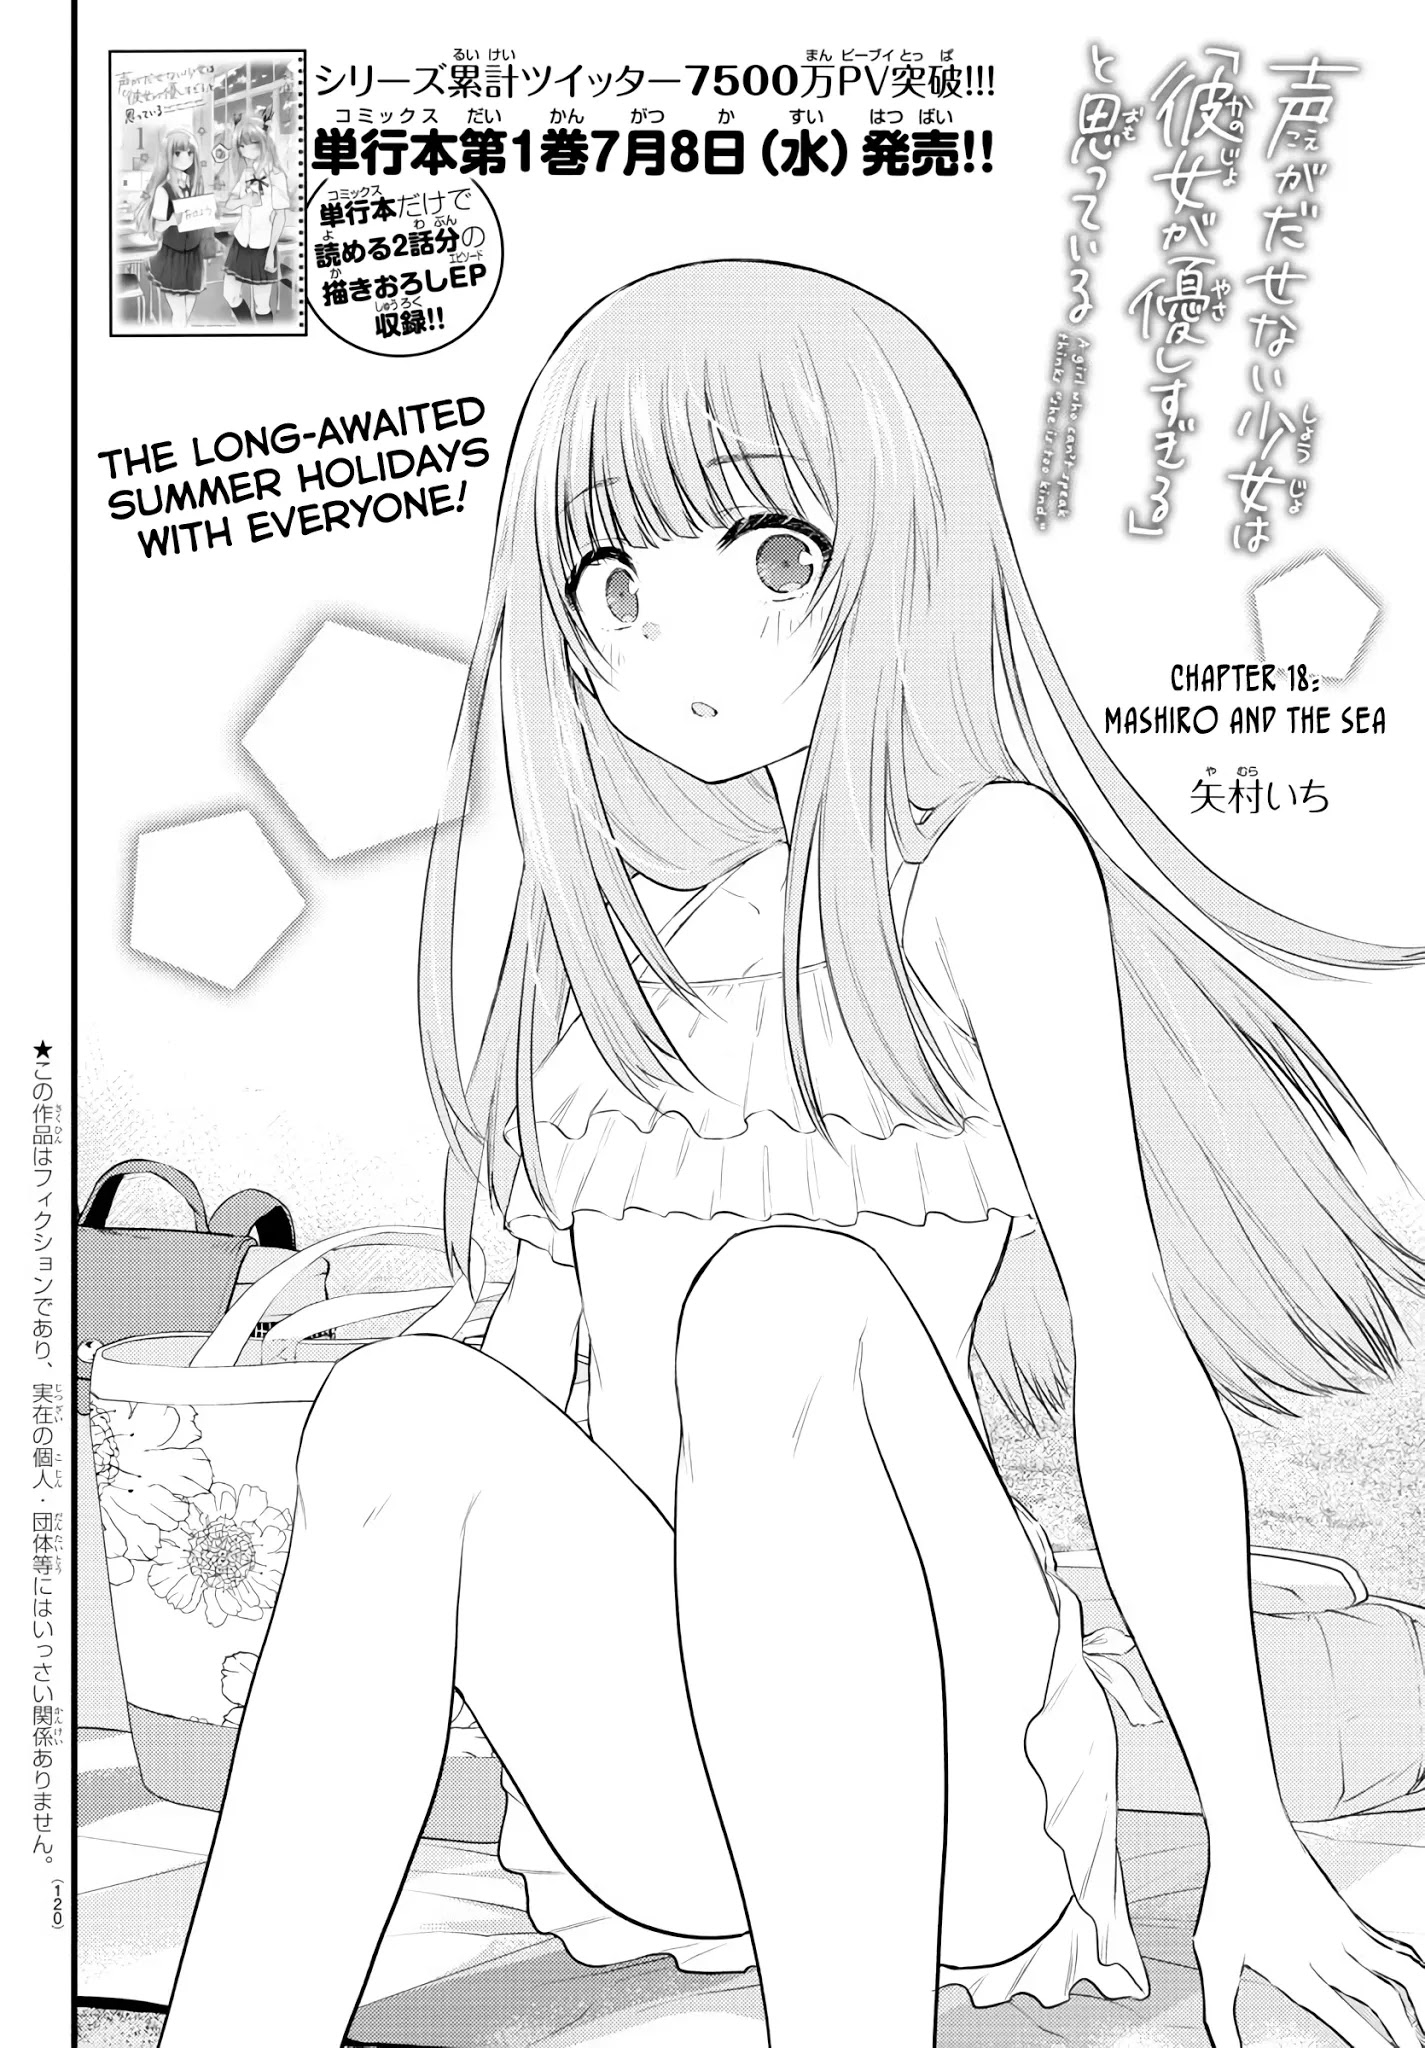 The Mute Girl And Her New Friend (Serialization) Chapter 18: Mashiro And The Sea - Picture 2